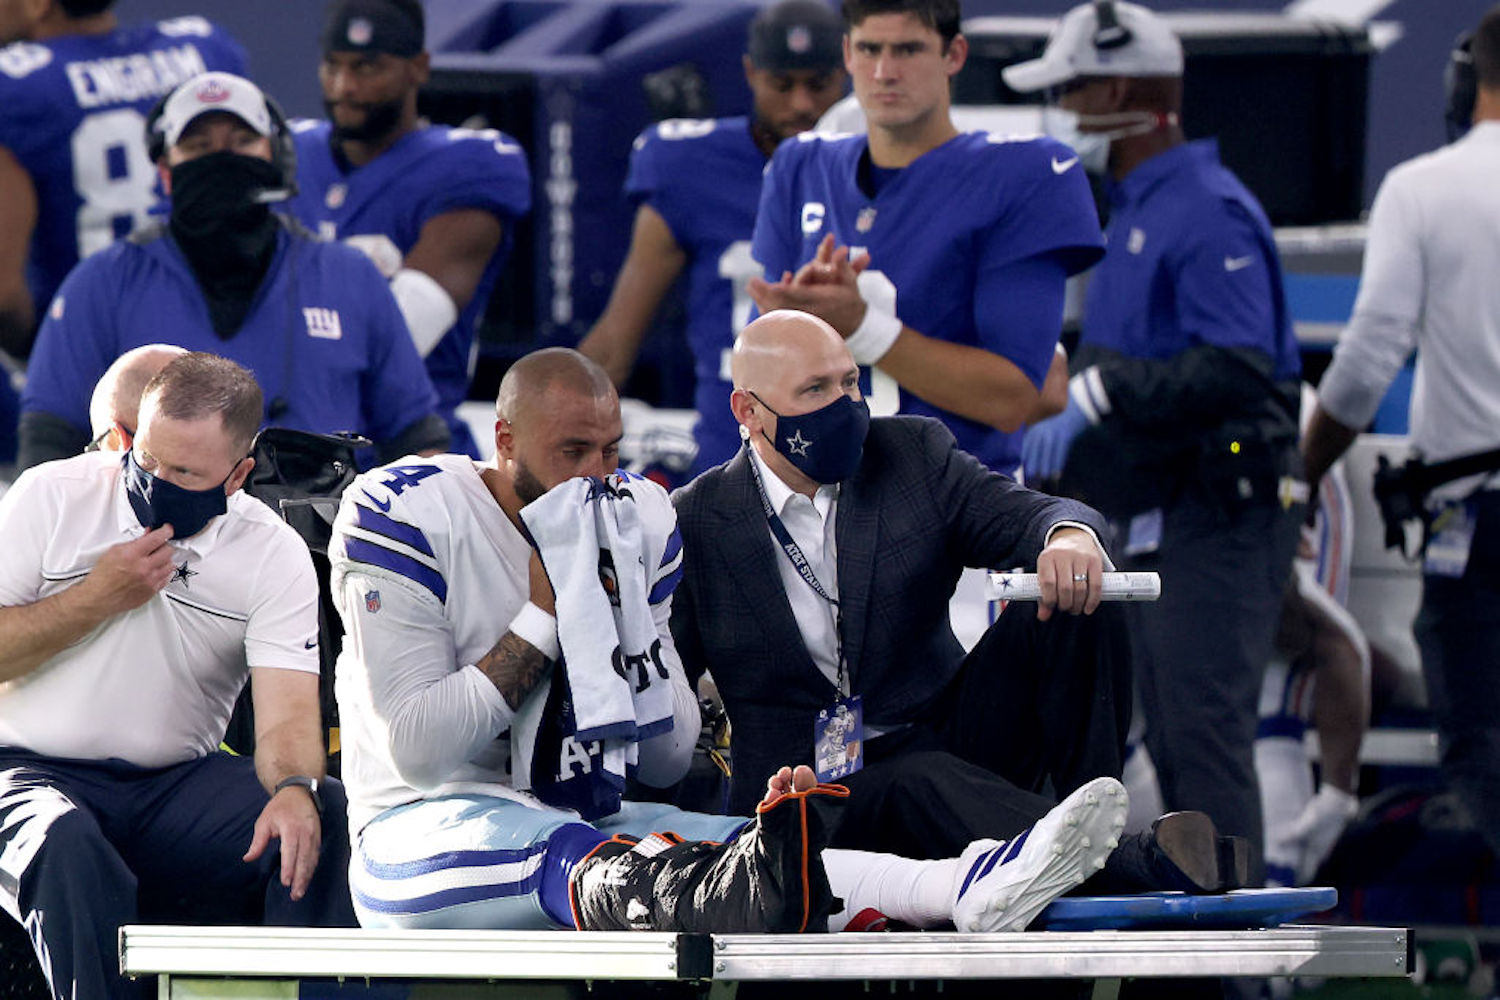 Dak Prescott suffered a gruesome ankle injury on Sunday, so how long will he be out and how have other players fared coming back from the same injury?